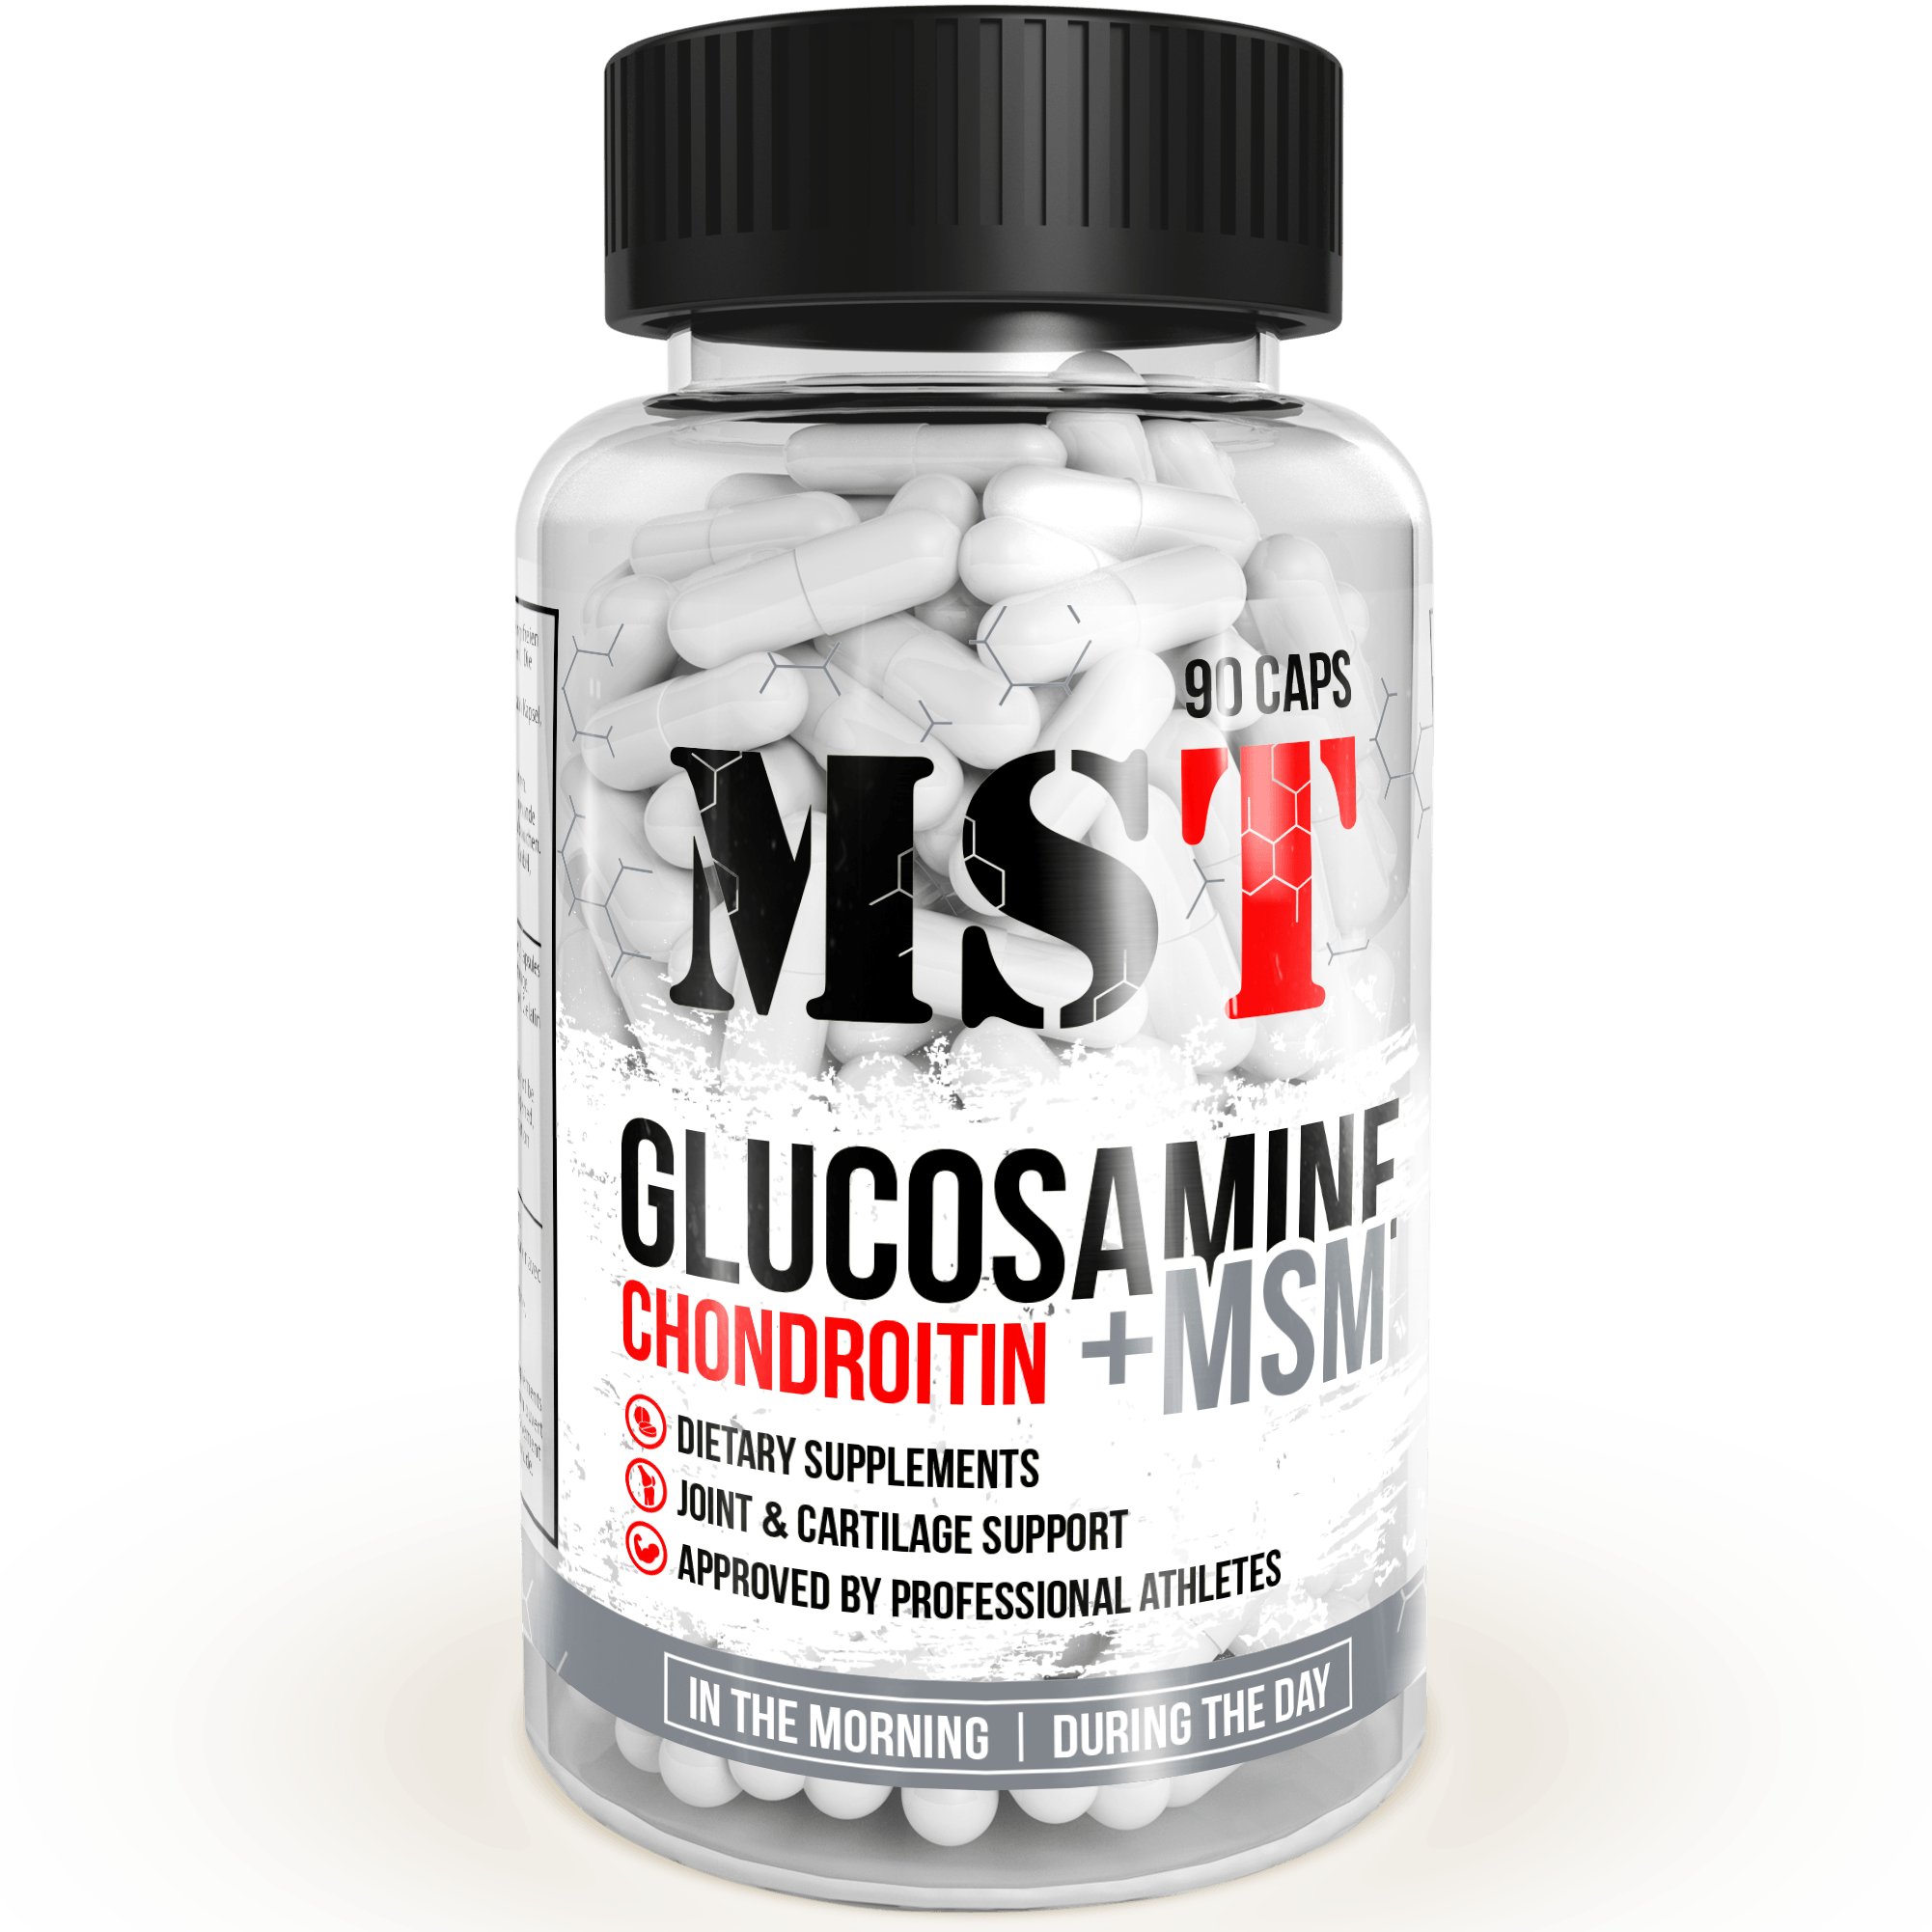 Glucosamine Chondroitin + MSM, 90 piezas, MST Nutrition. Para articulaciones y ligamentos. General Health Ligament and Joint strengthening 